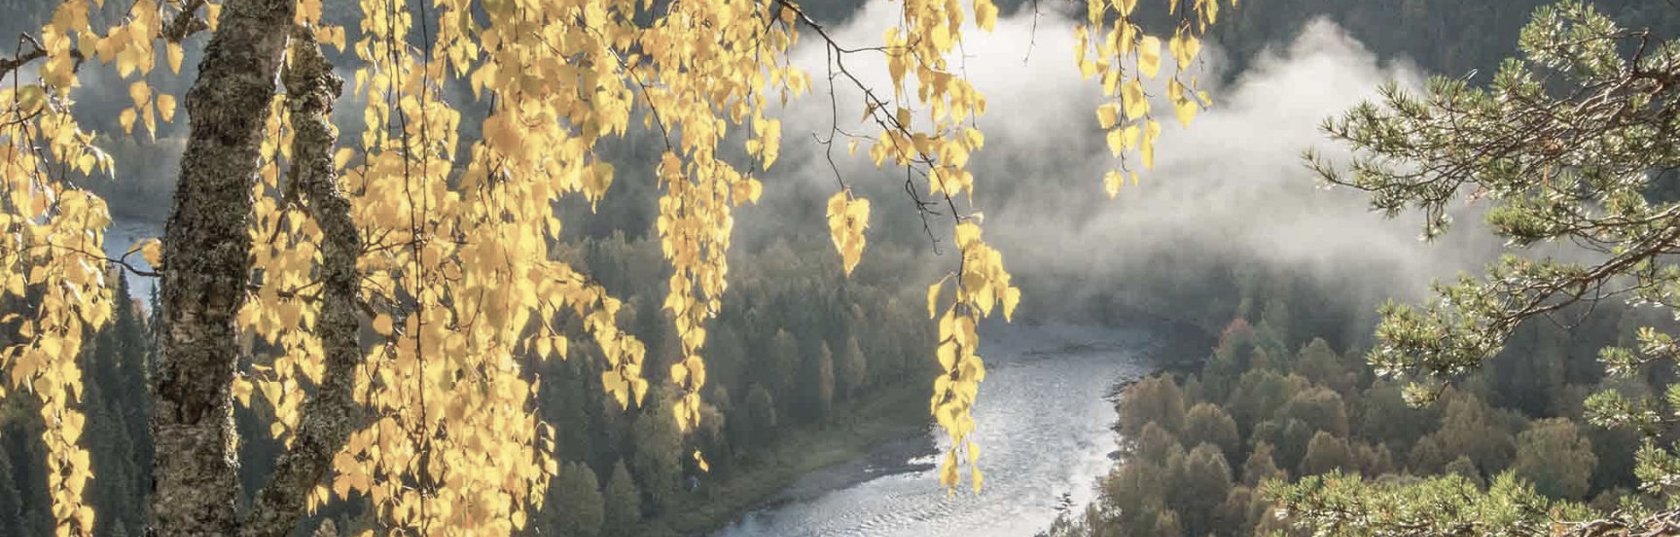 Finland’s photo contest winners impress with stunning landscape photos